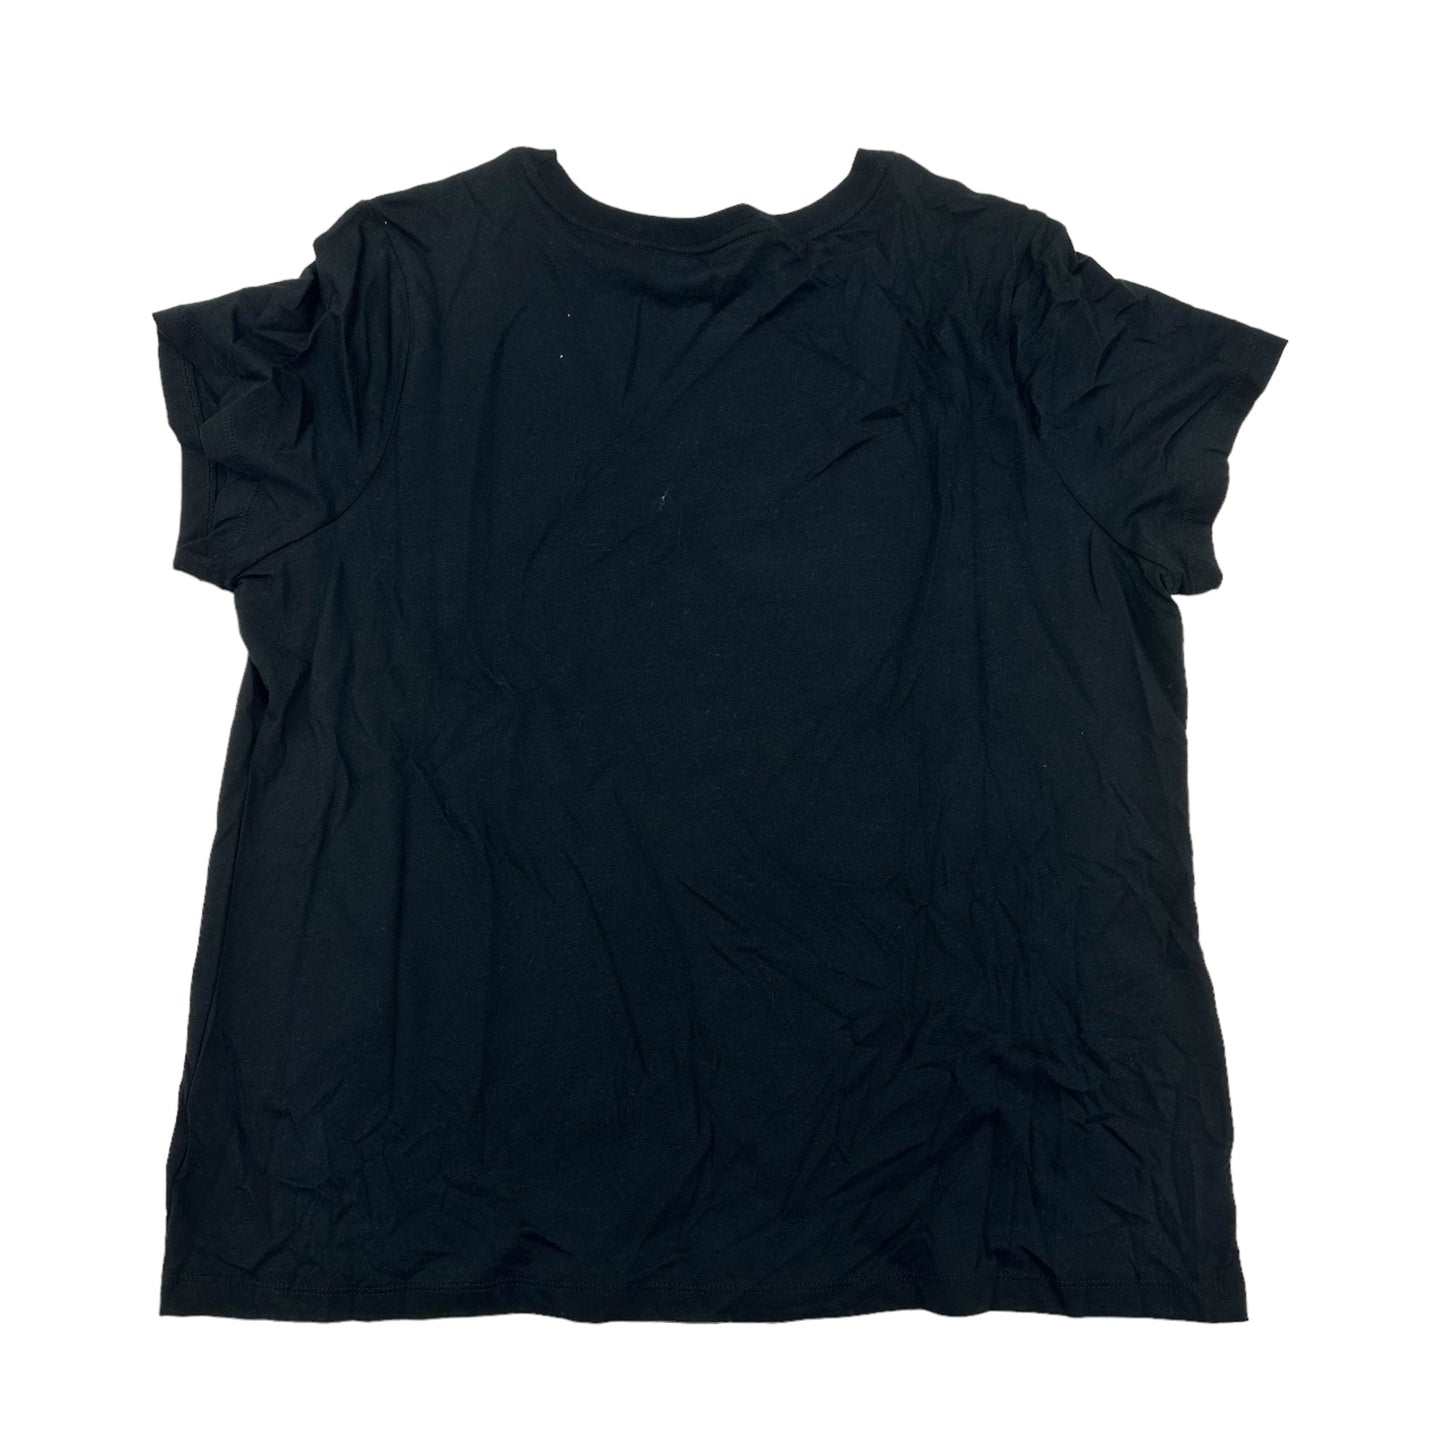 Black Top Short Sleeve A New Day, Size Xxl